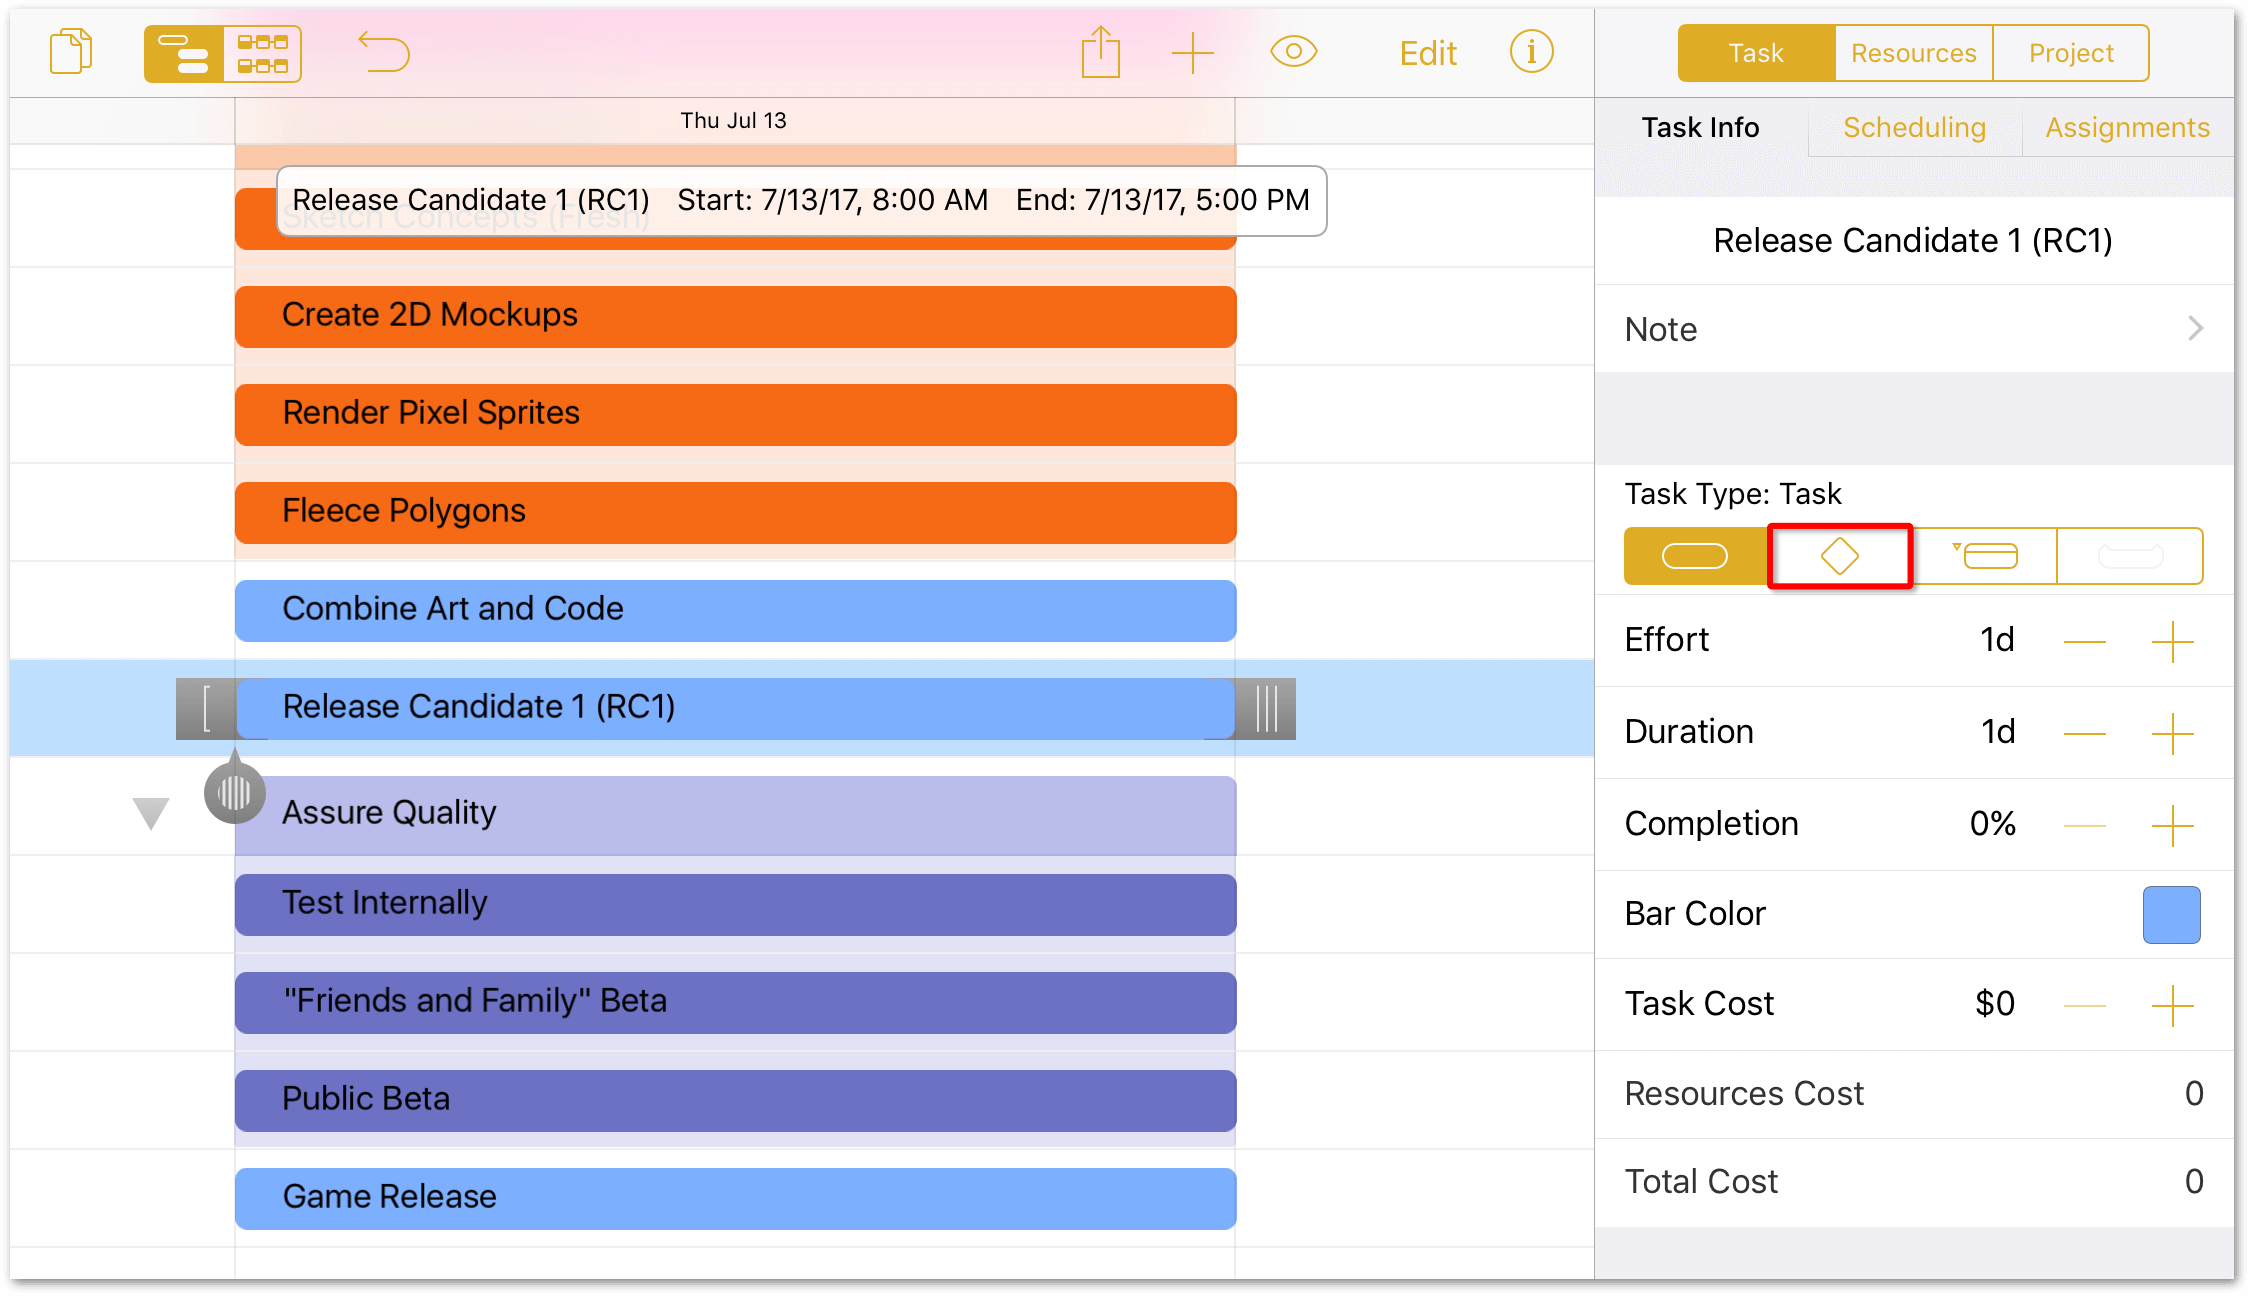 The RC1 task is selected in the project editor, and a highlight has been added to the Task Type selectors, indicating that tapping the second button will convert the selected task into a Milestone.